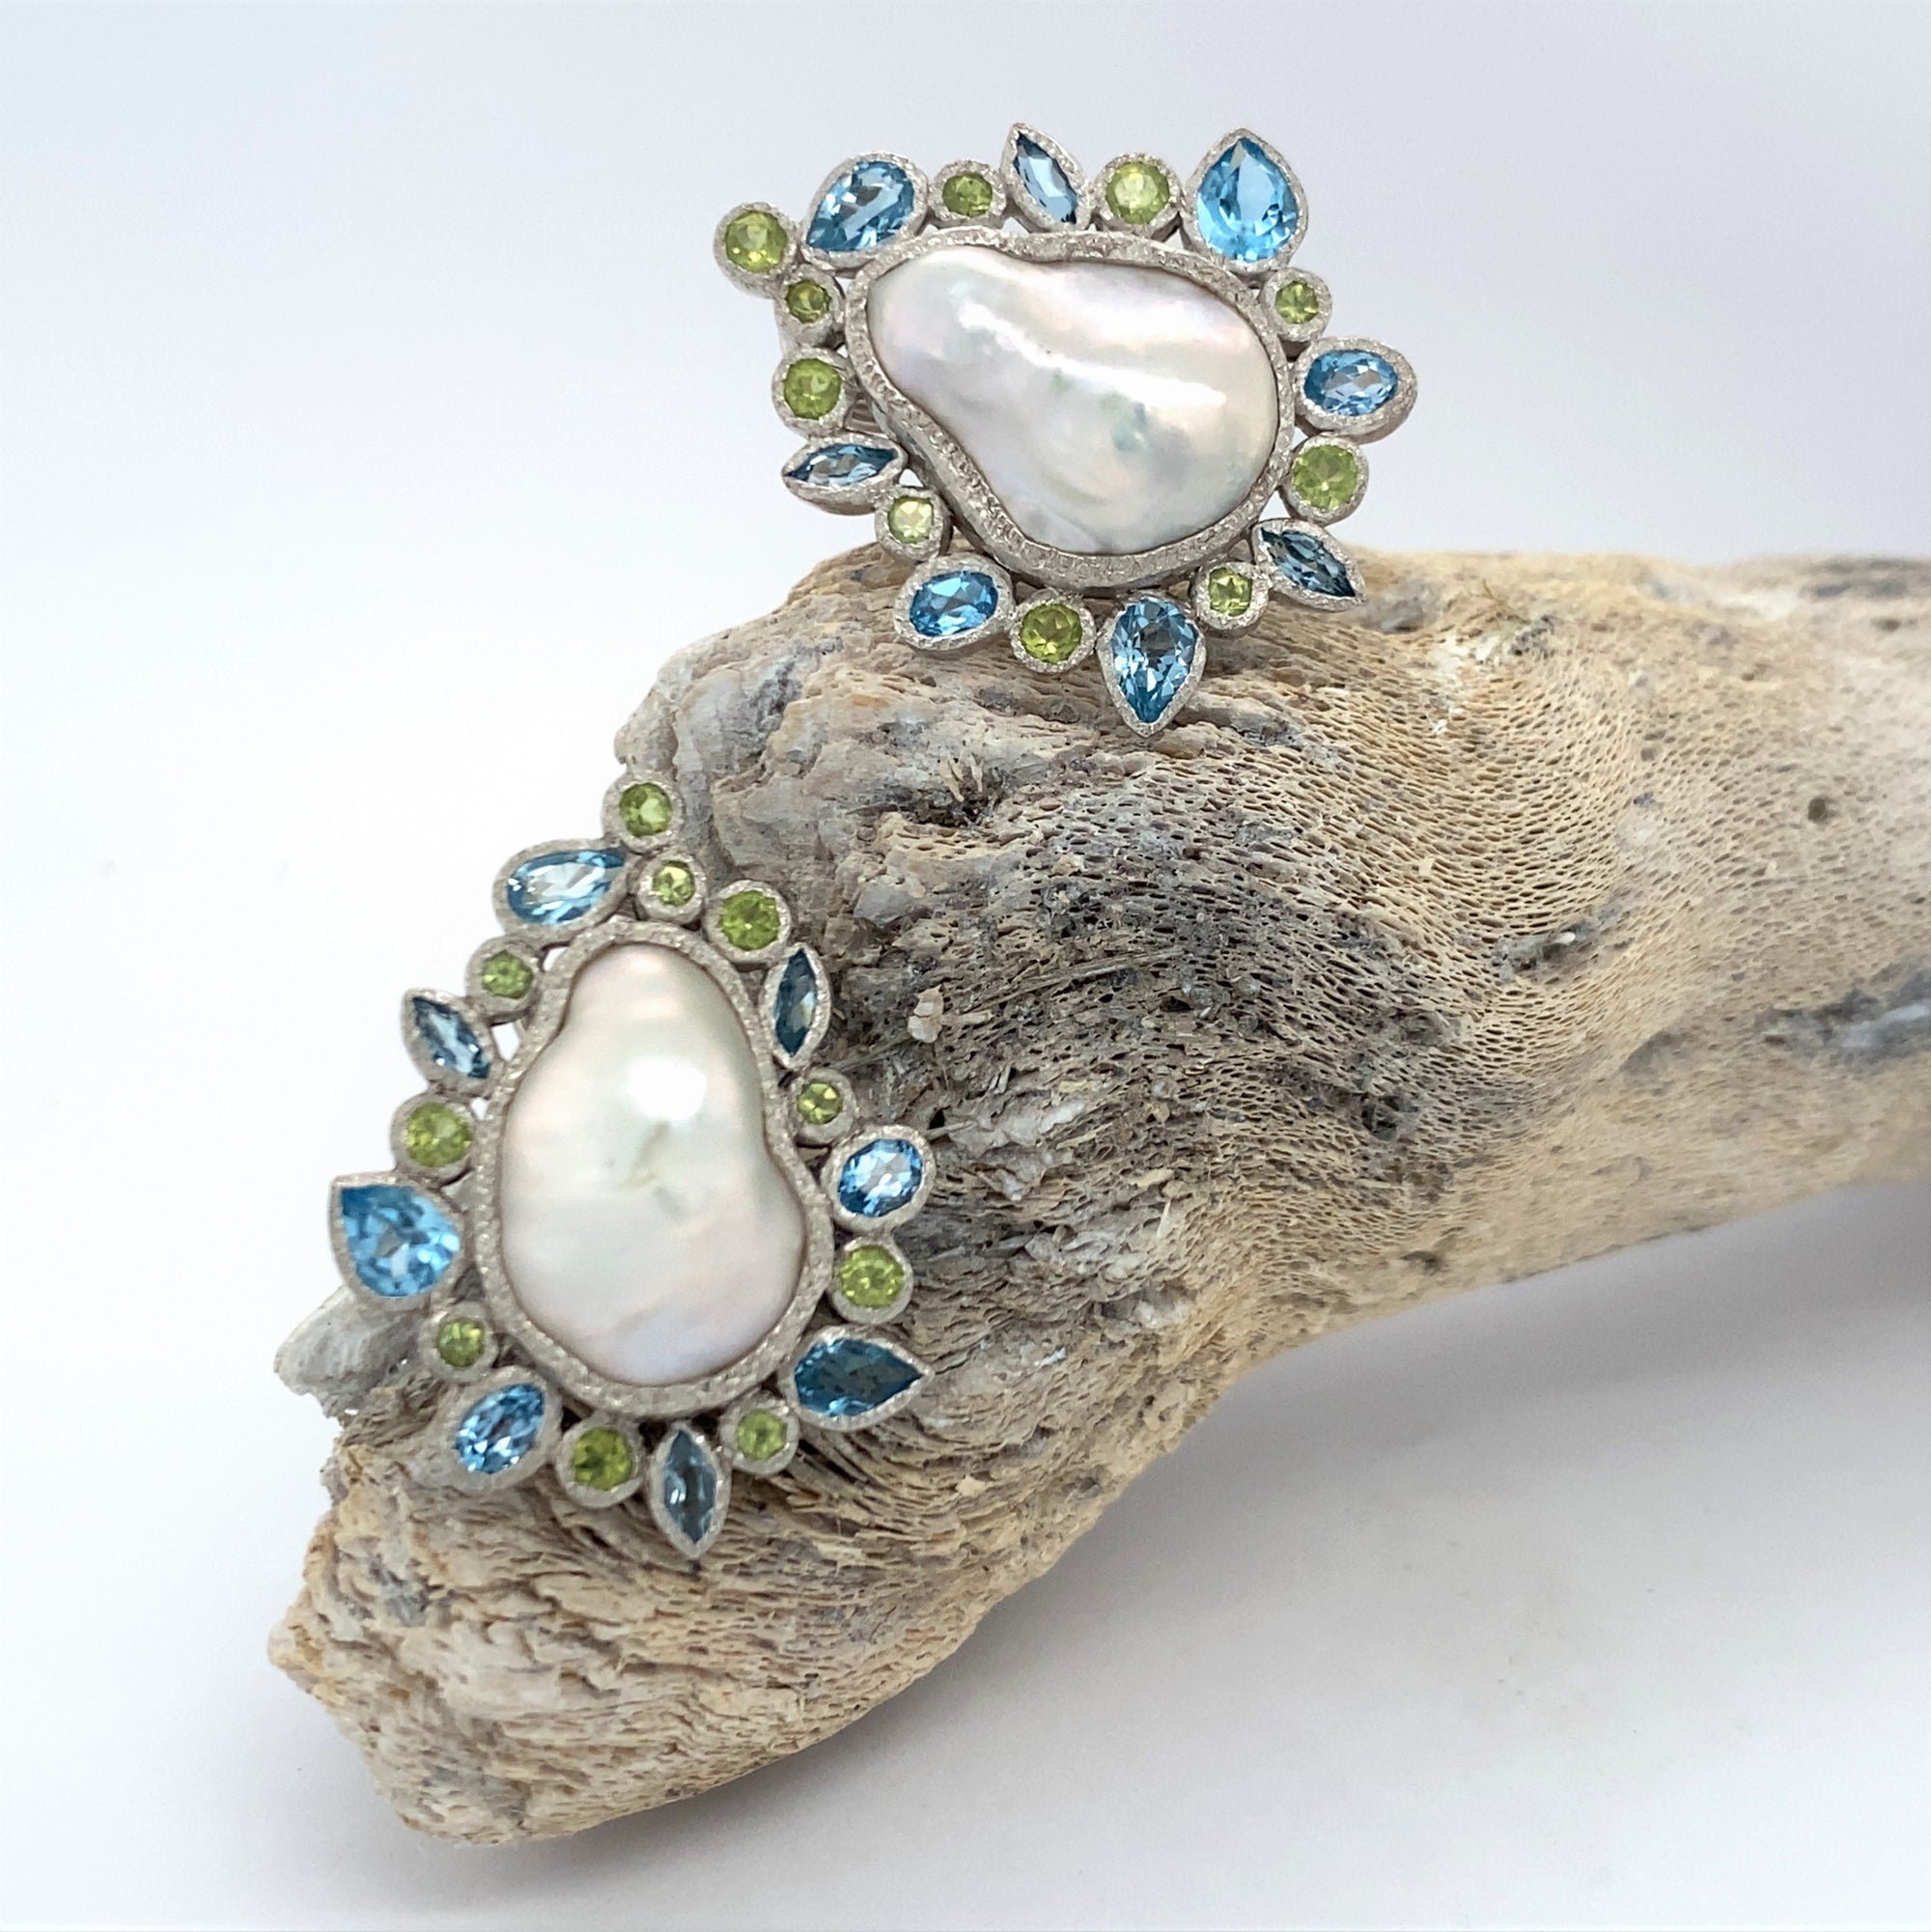 Dream of Moorea - Silver and Baroque Pearl Earrings